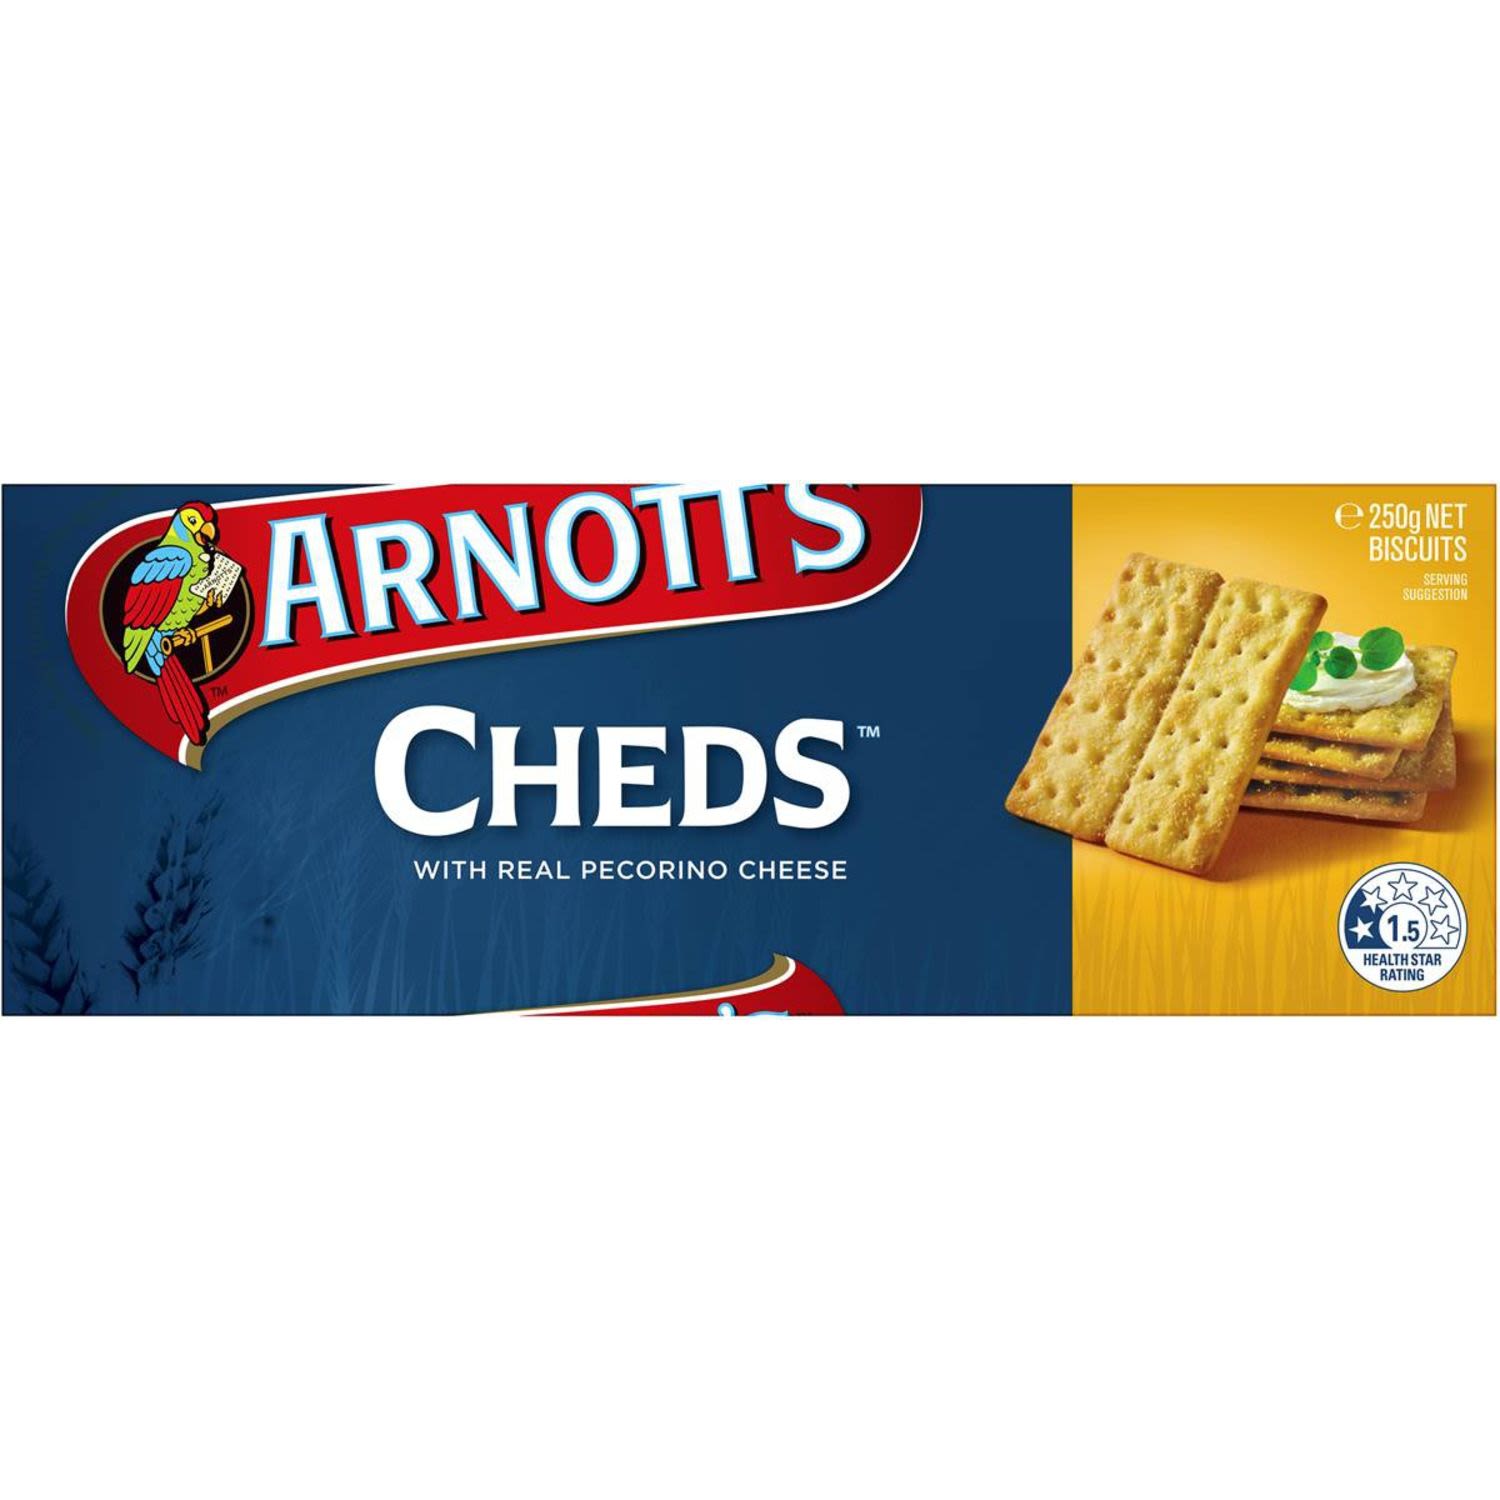 Arnotts Cheds Crackers 250gm